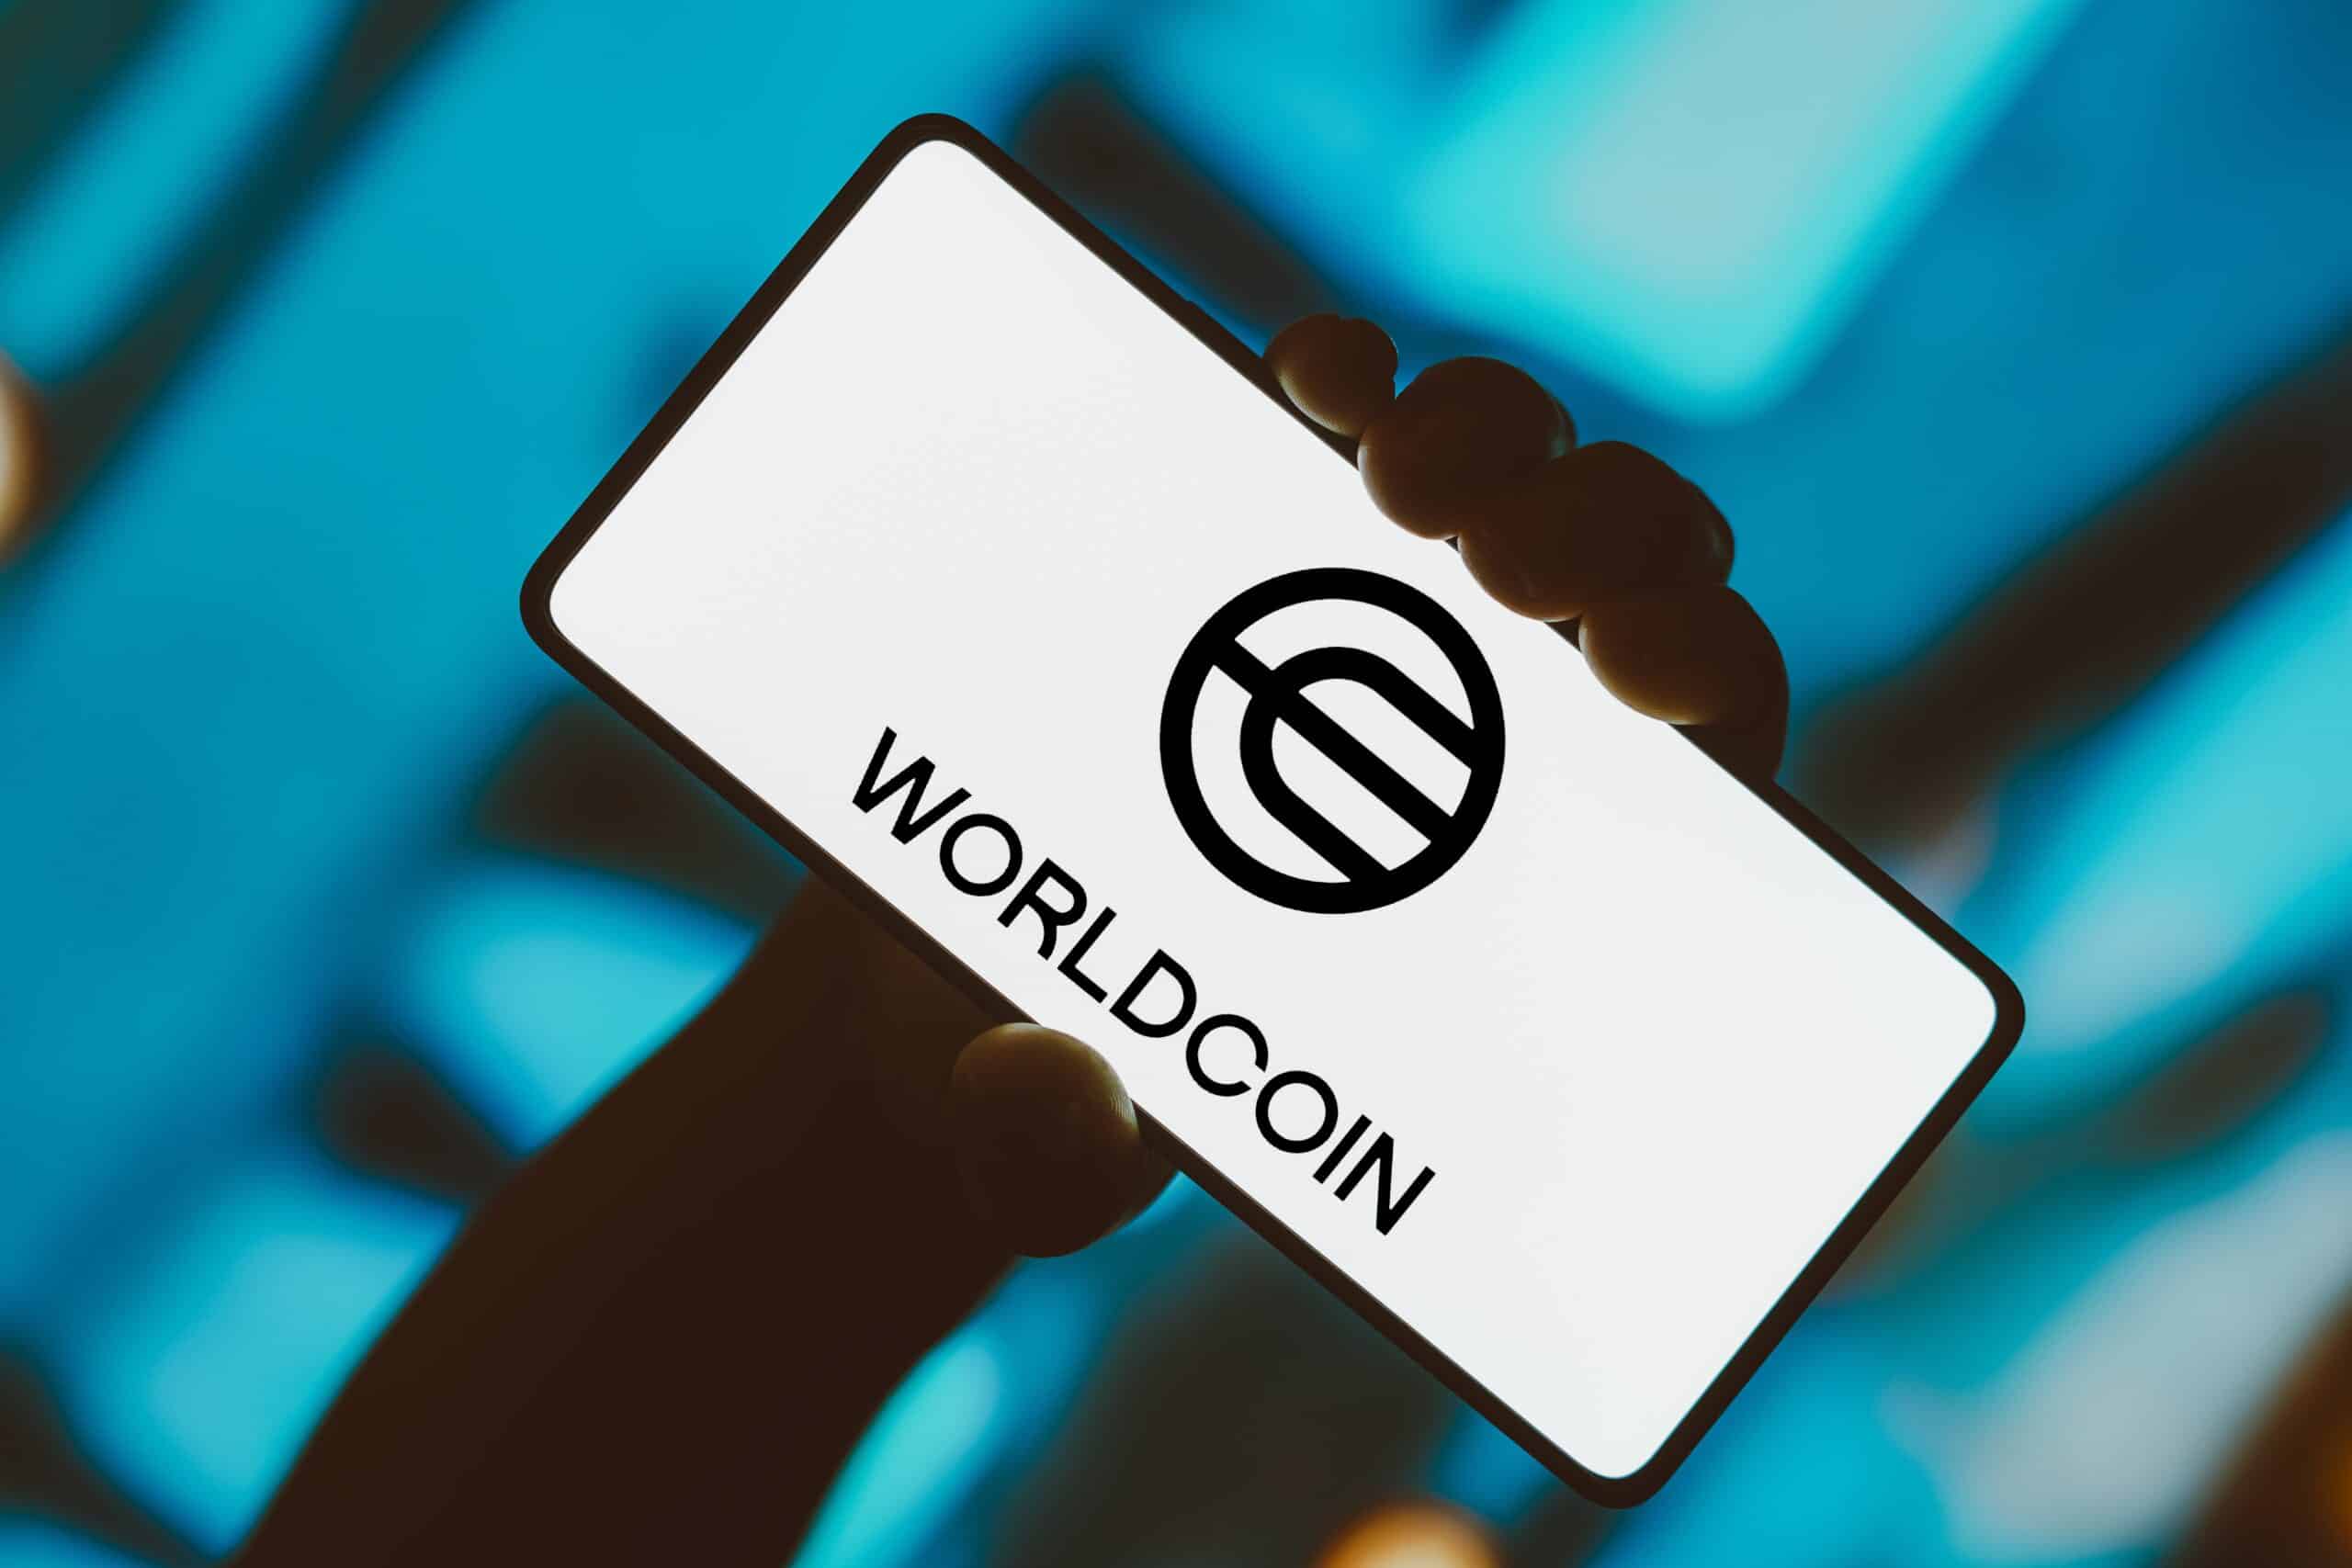 Worldcoin Enhances Data Privacy with “Personal Custody” Feature